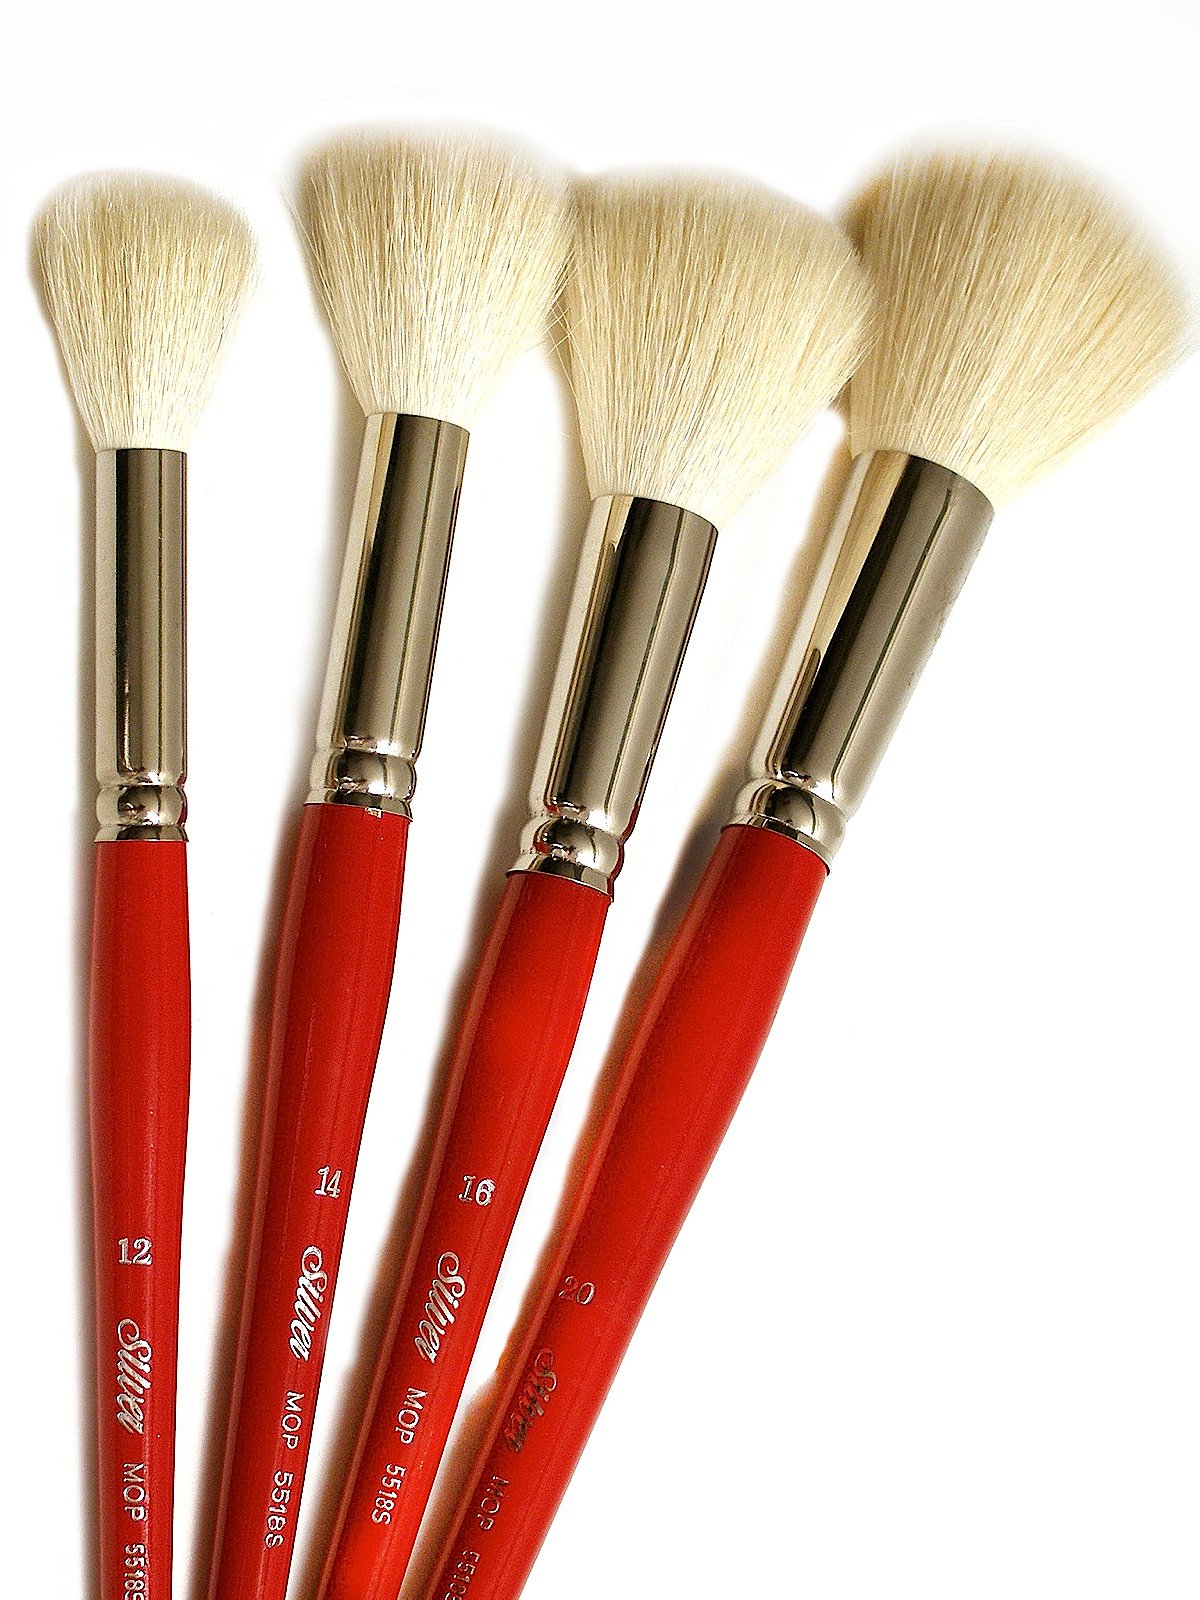 White Round Mop Series 5518S by Silver Brush - Brushes and More